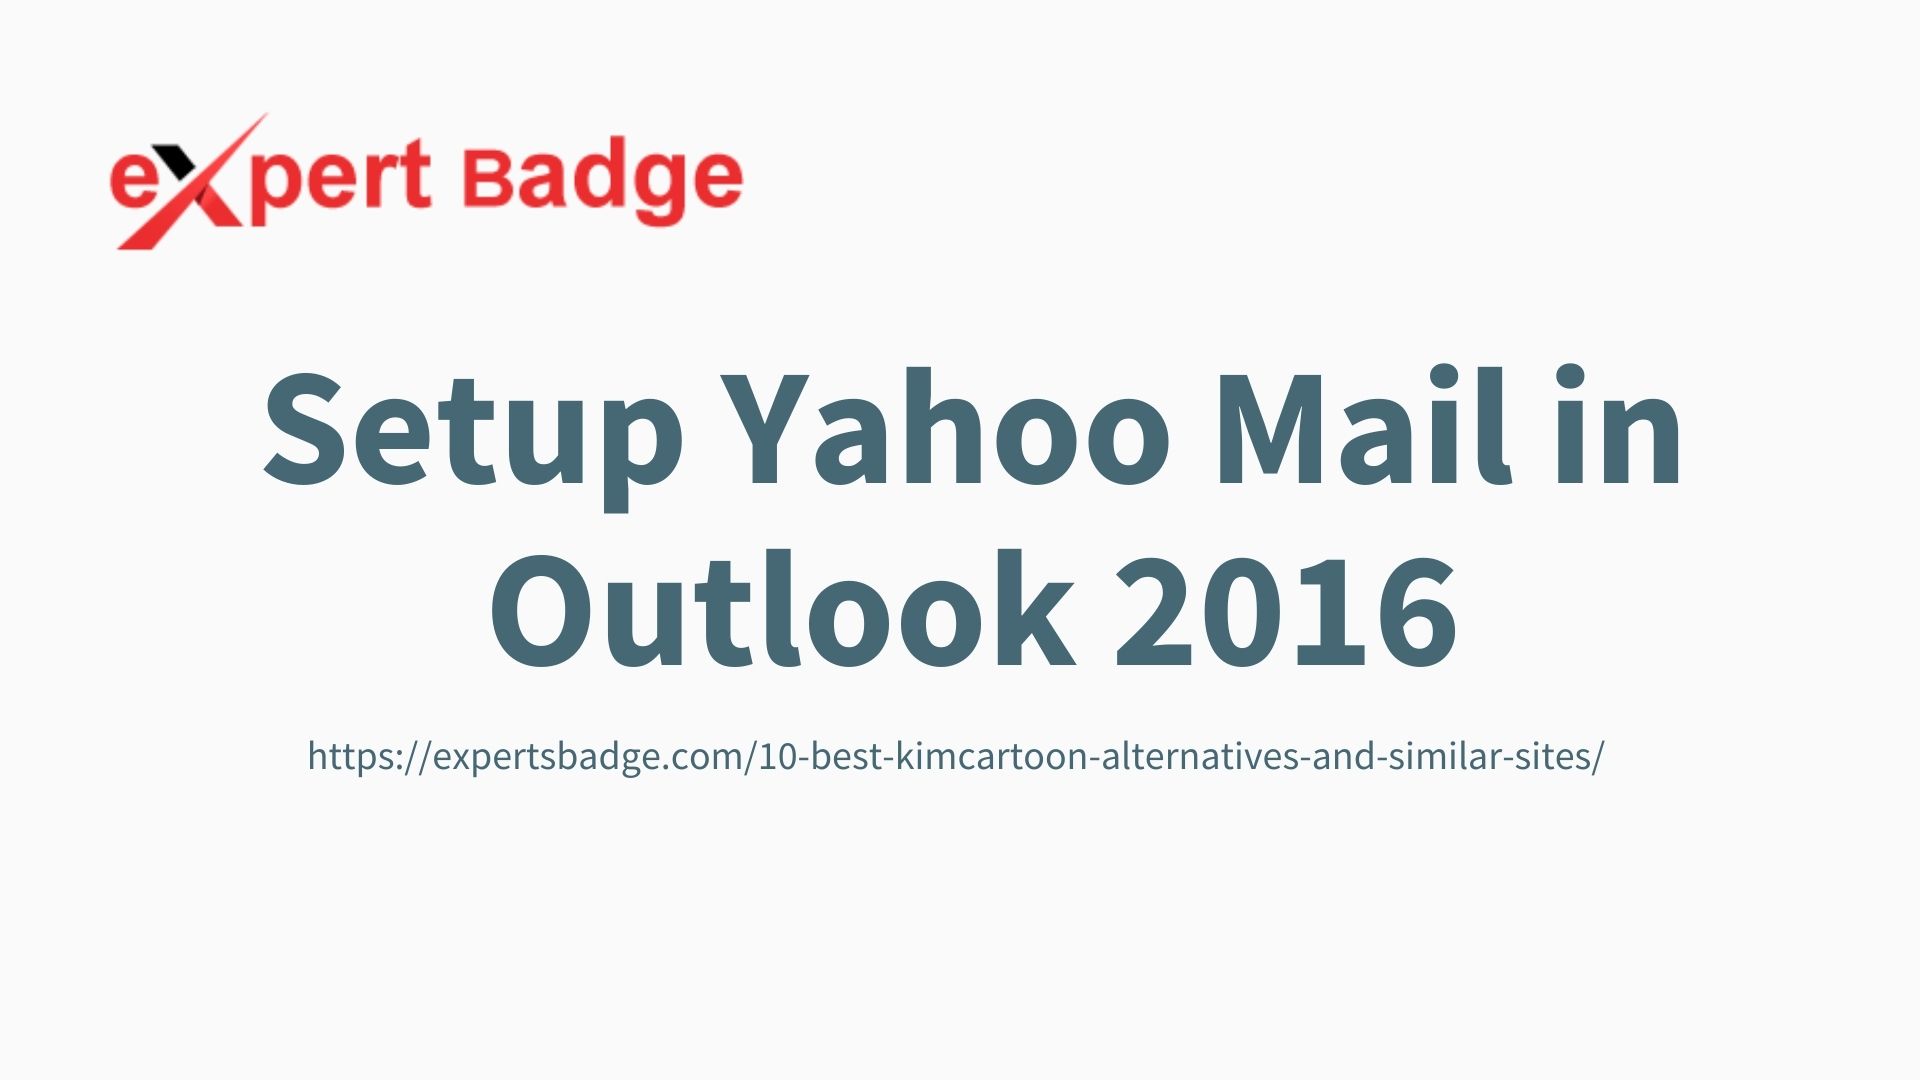 Article about Can Microsoft Outlook be Used With Yahoo Mail